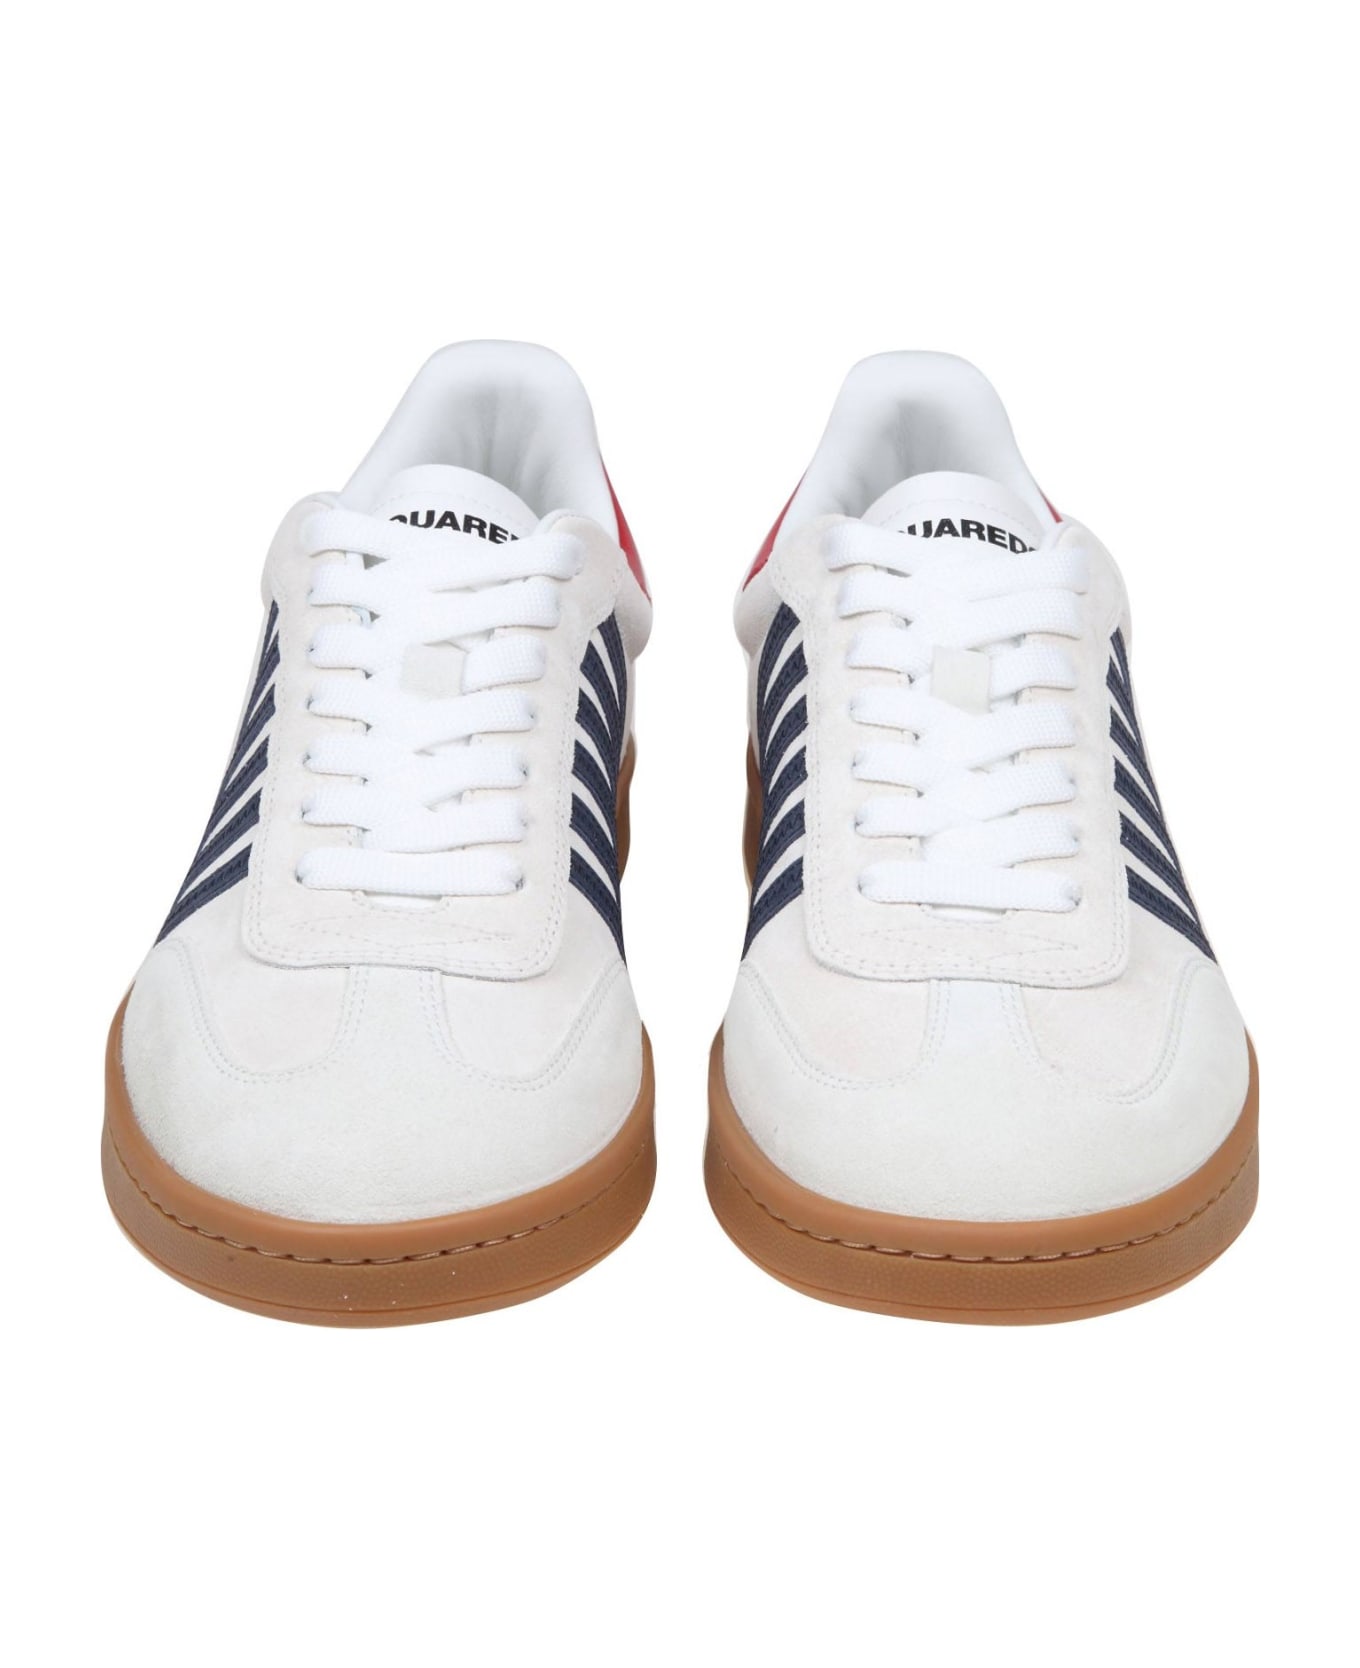 Dsquared2 Boxer Sneakers In White/blue Suede Leather - WHITE/BLU